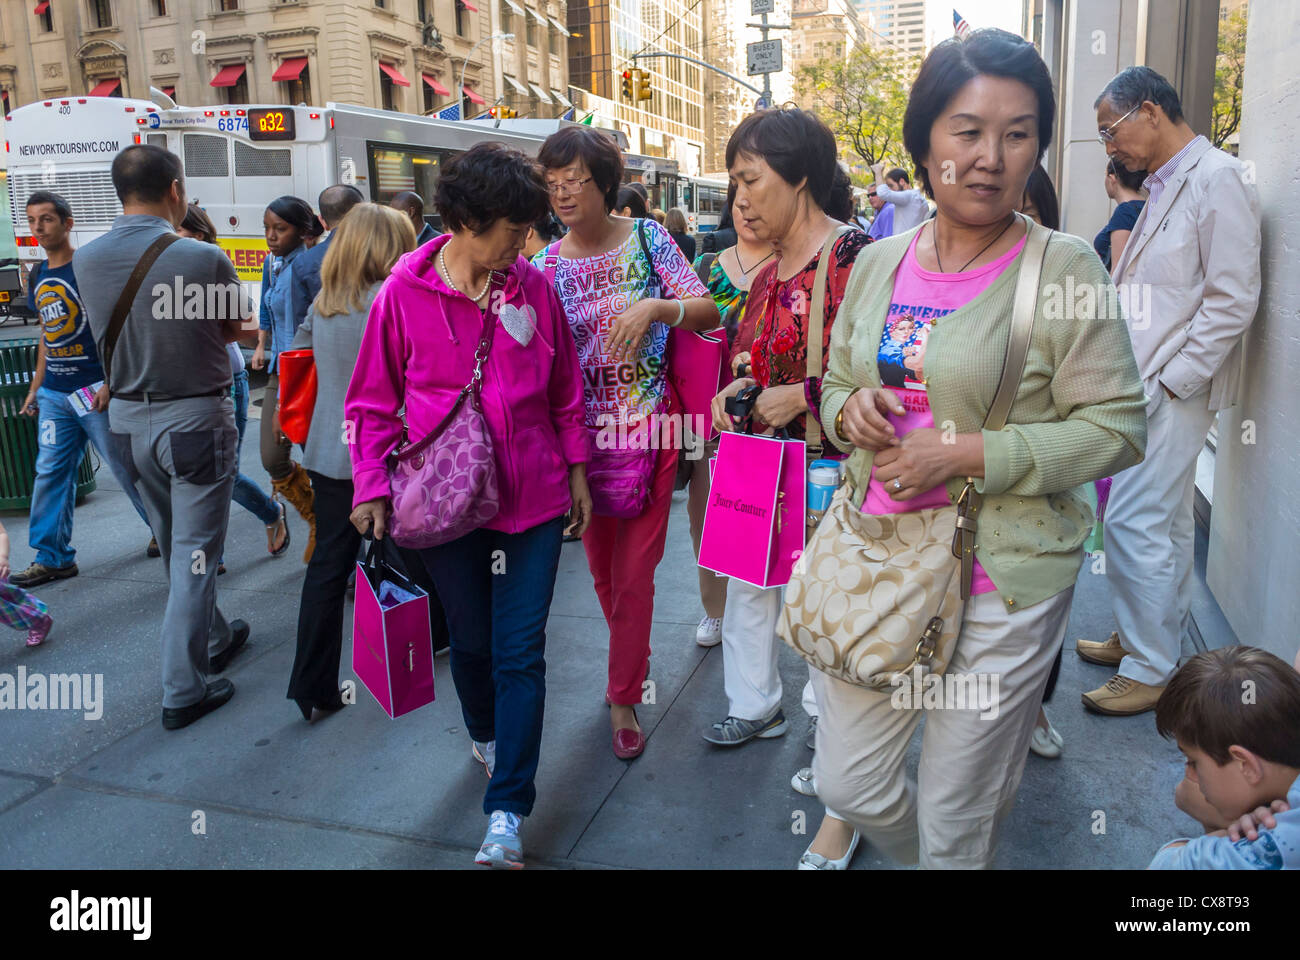 New York, NY, USA, Large Crowd of People, Women Tourists carrying Shopping Bags, Busy Street Scenes, Luxury Shops on Fifth Avenue, Manhattan, urban walking, Chinese People city street, clothes shopping  [USA] multicultural street, chinese crowd faces, crowded sidewalk new york Stock Photo